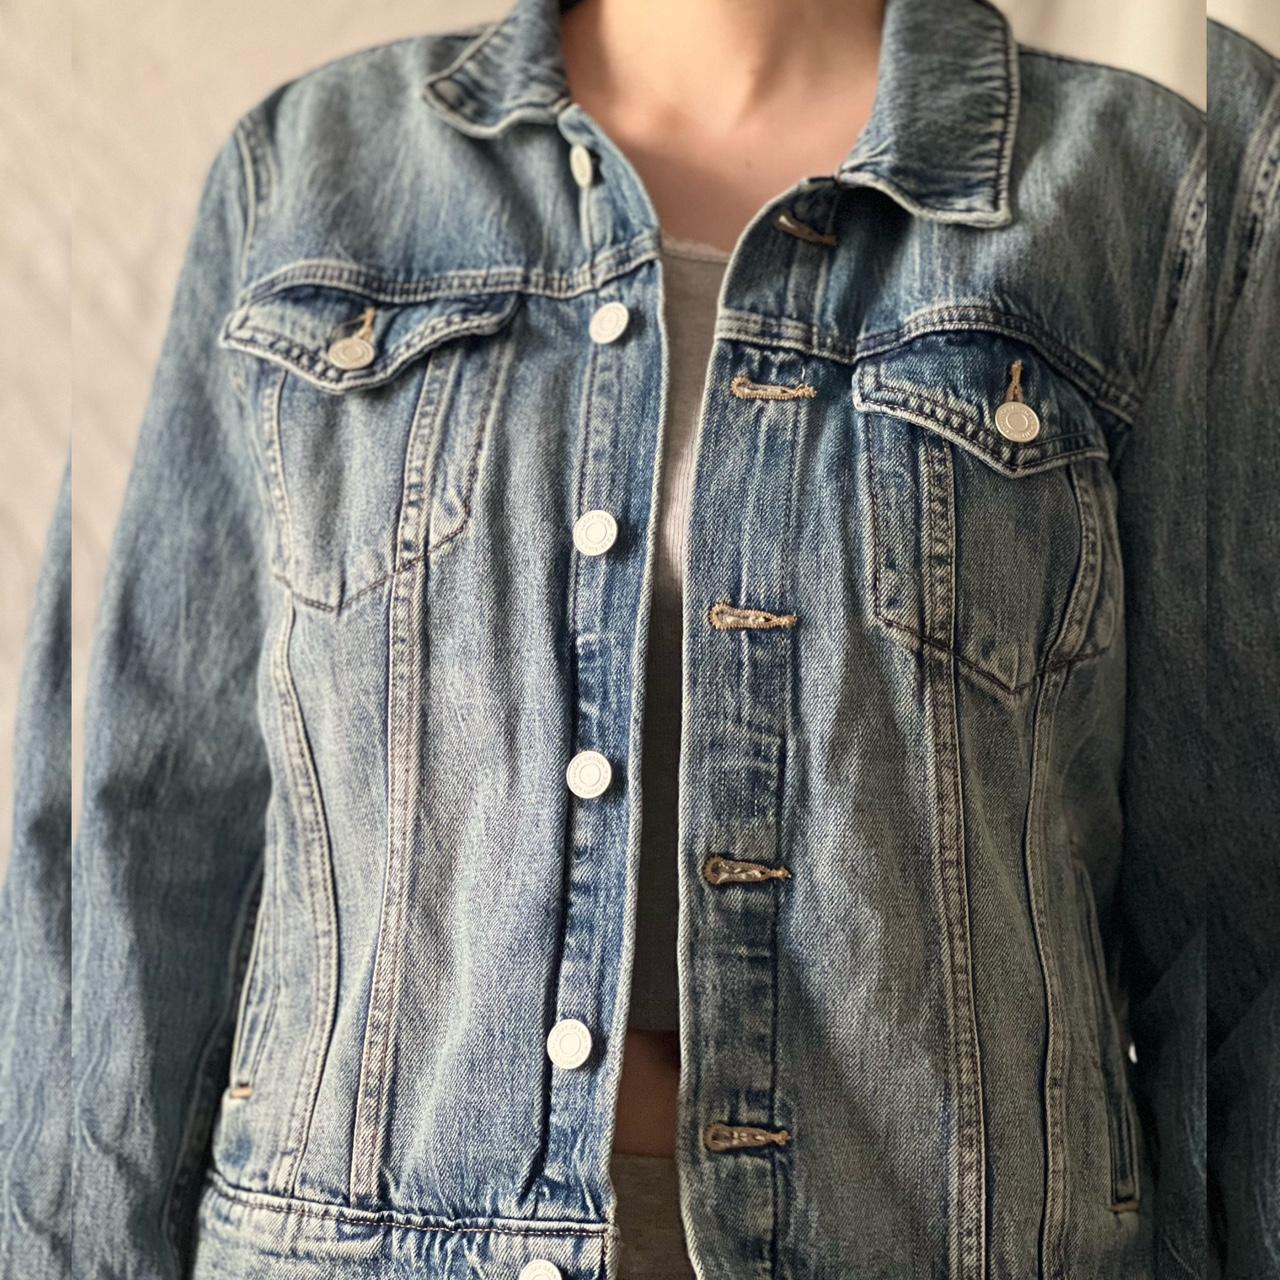 Lucky brand jean jacket bought 3 years ago for my - Depop